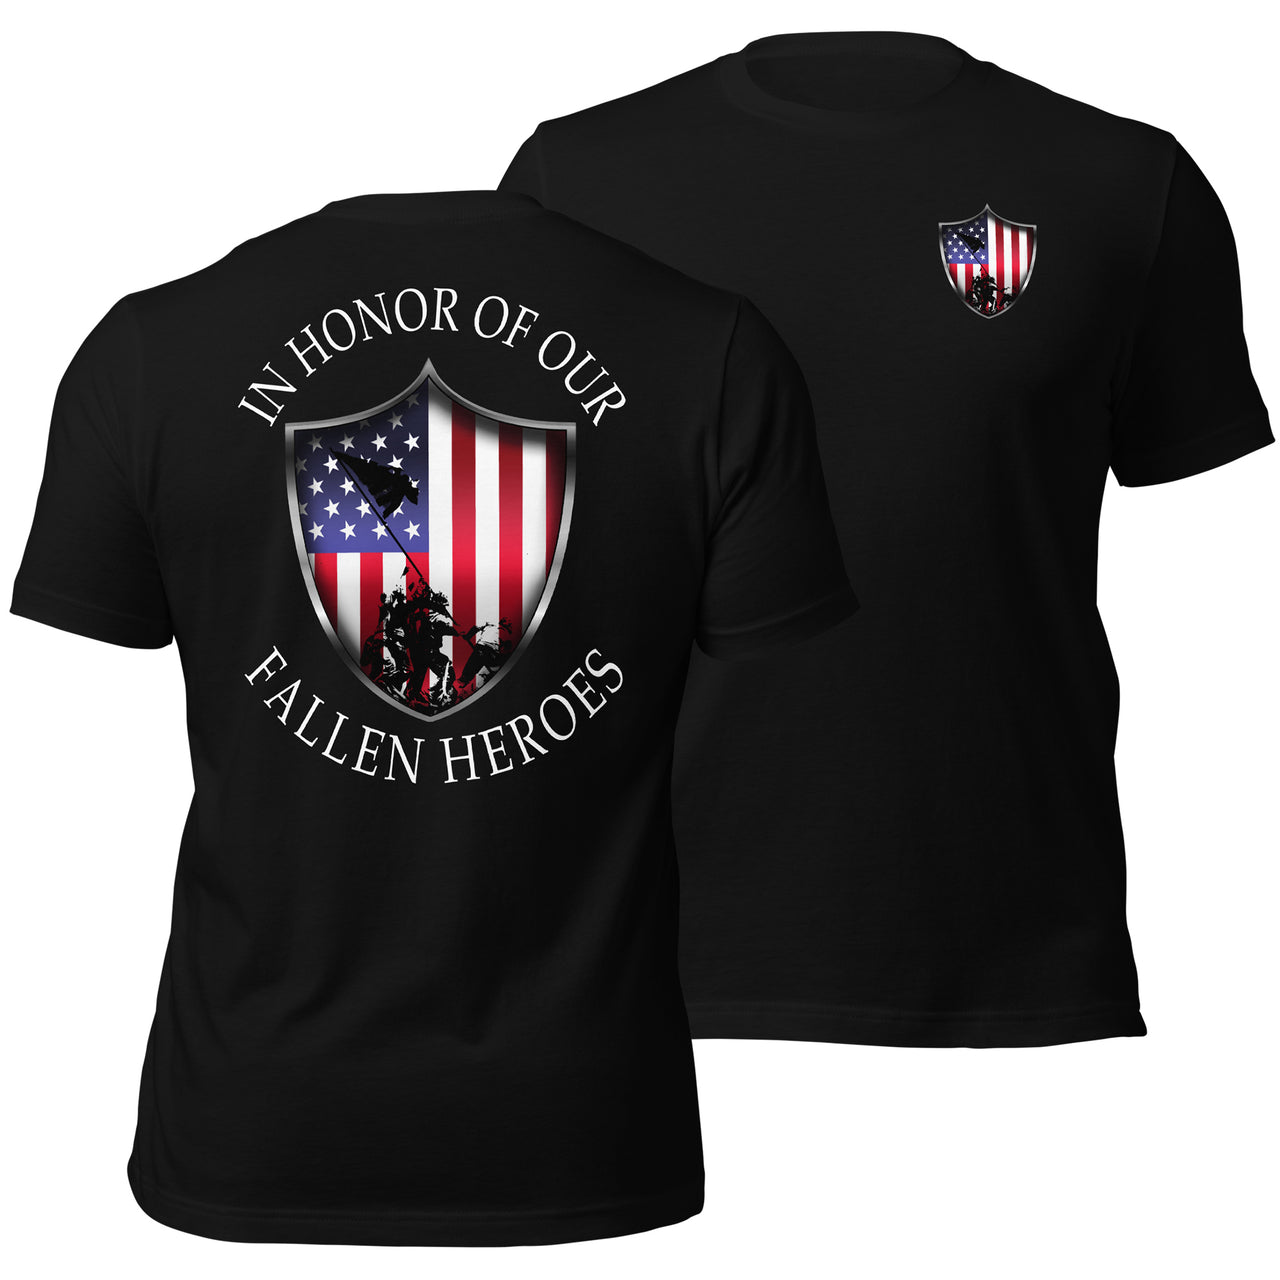 Military T-Shirt In Honor Of Our Fallen Heroes